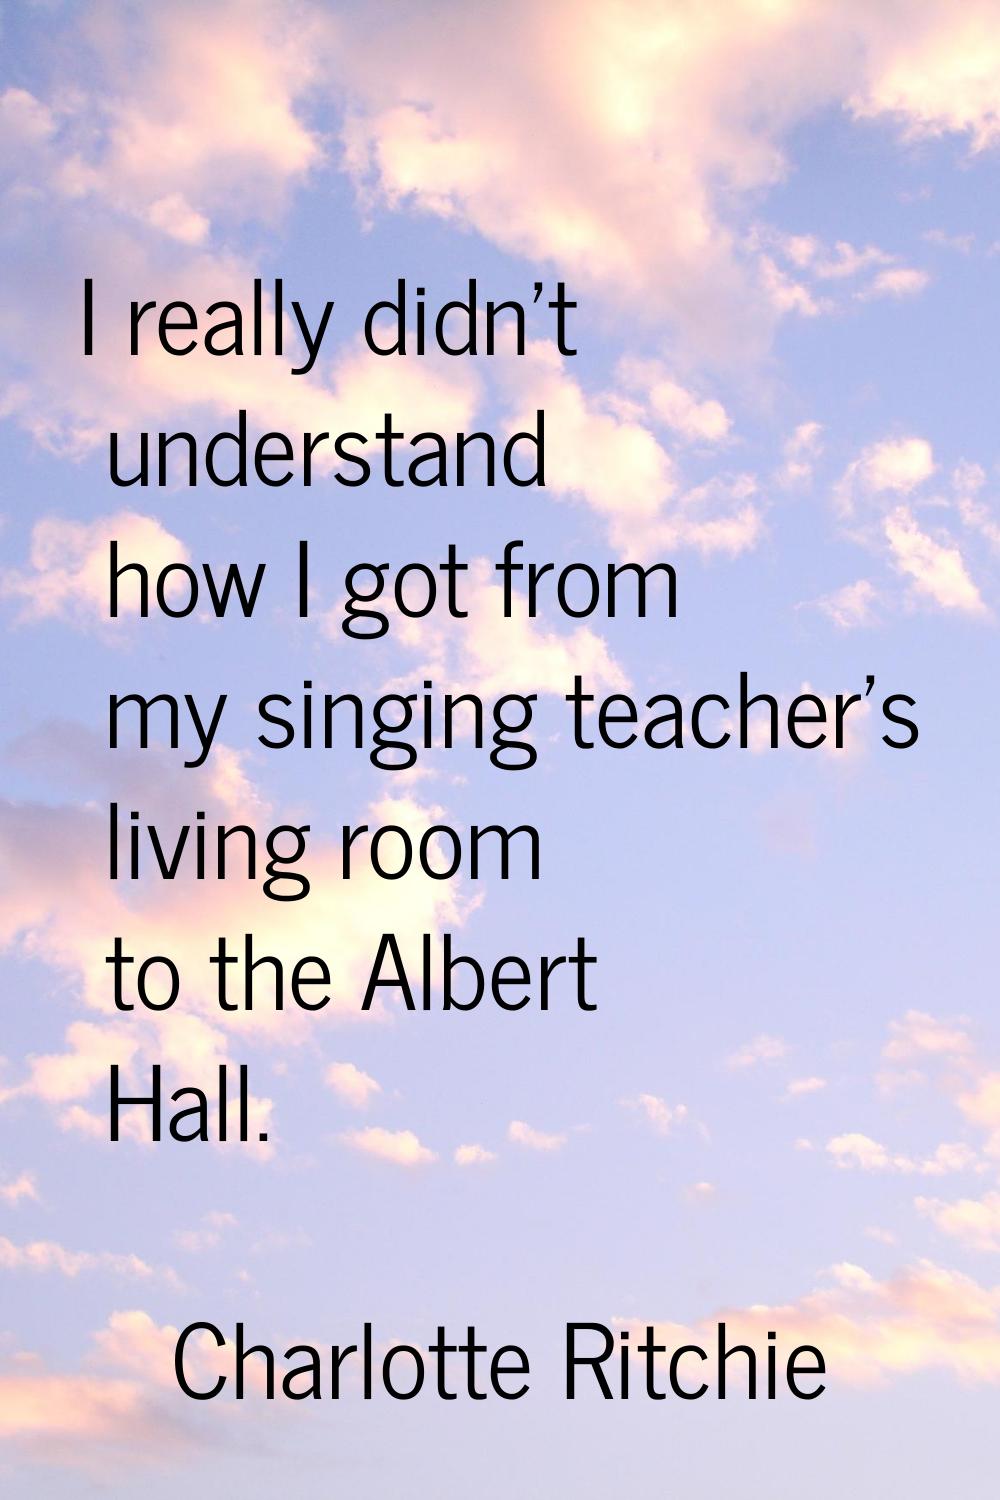 I really didn't understand how I got from my singing teacher's living room to the Albert Hall.